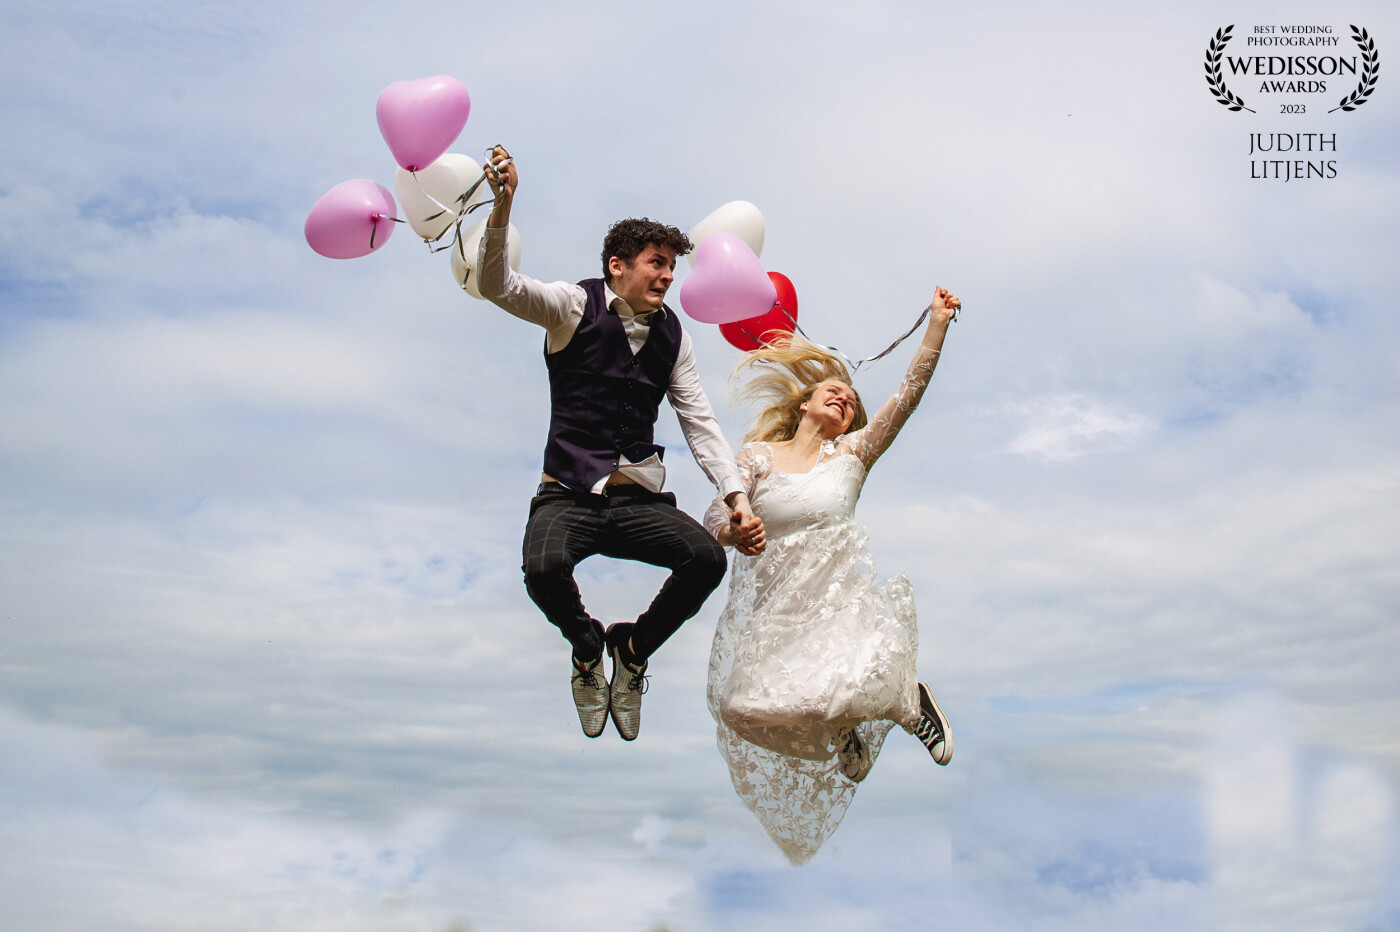 I love it when a bridal couple wants nice happy photos. A bright blue sky, a few helium balloons and high jumps make this photo.